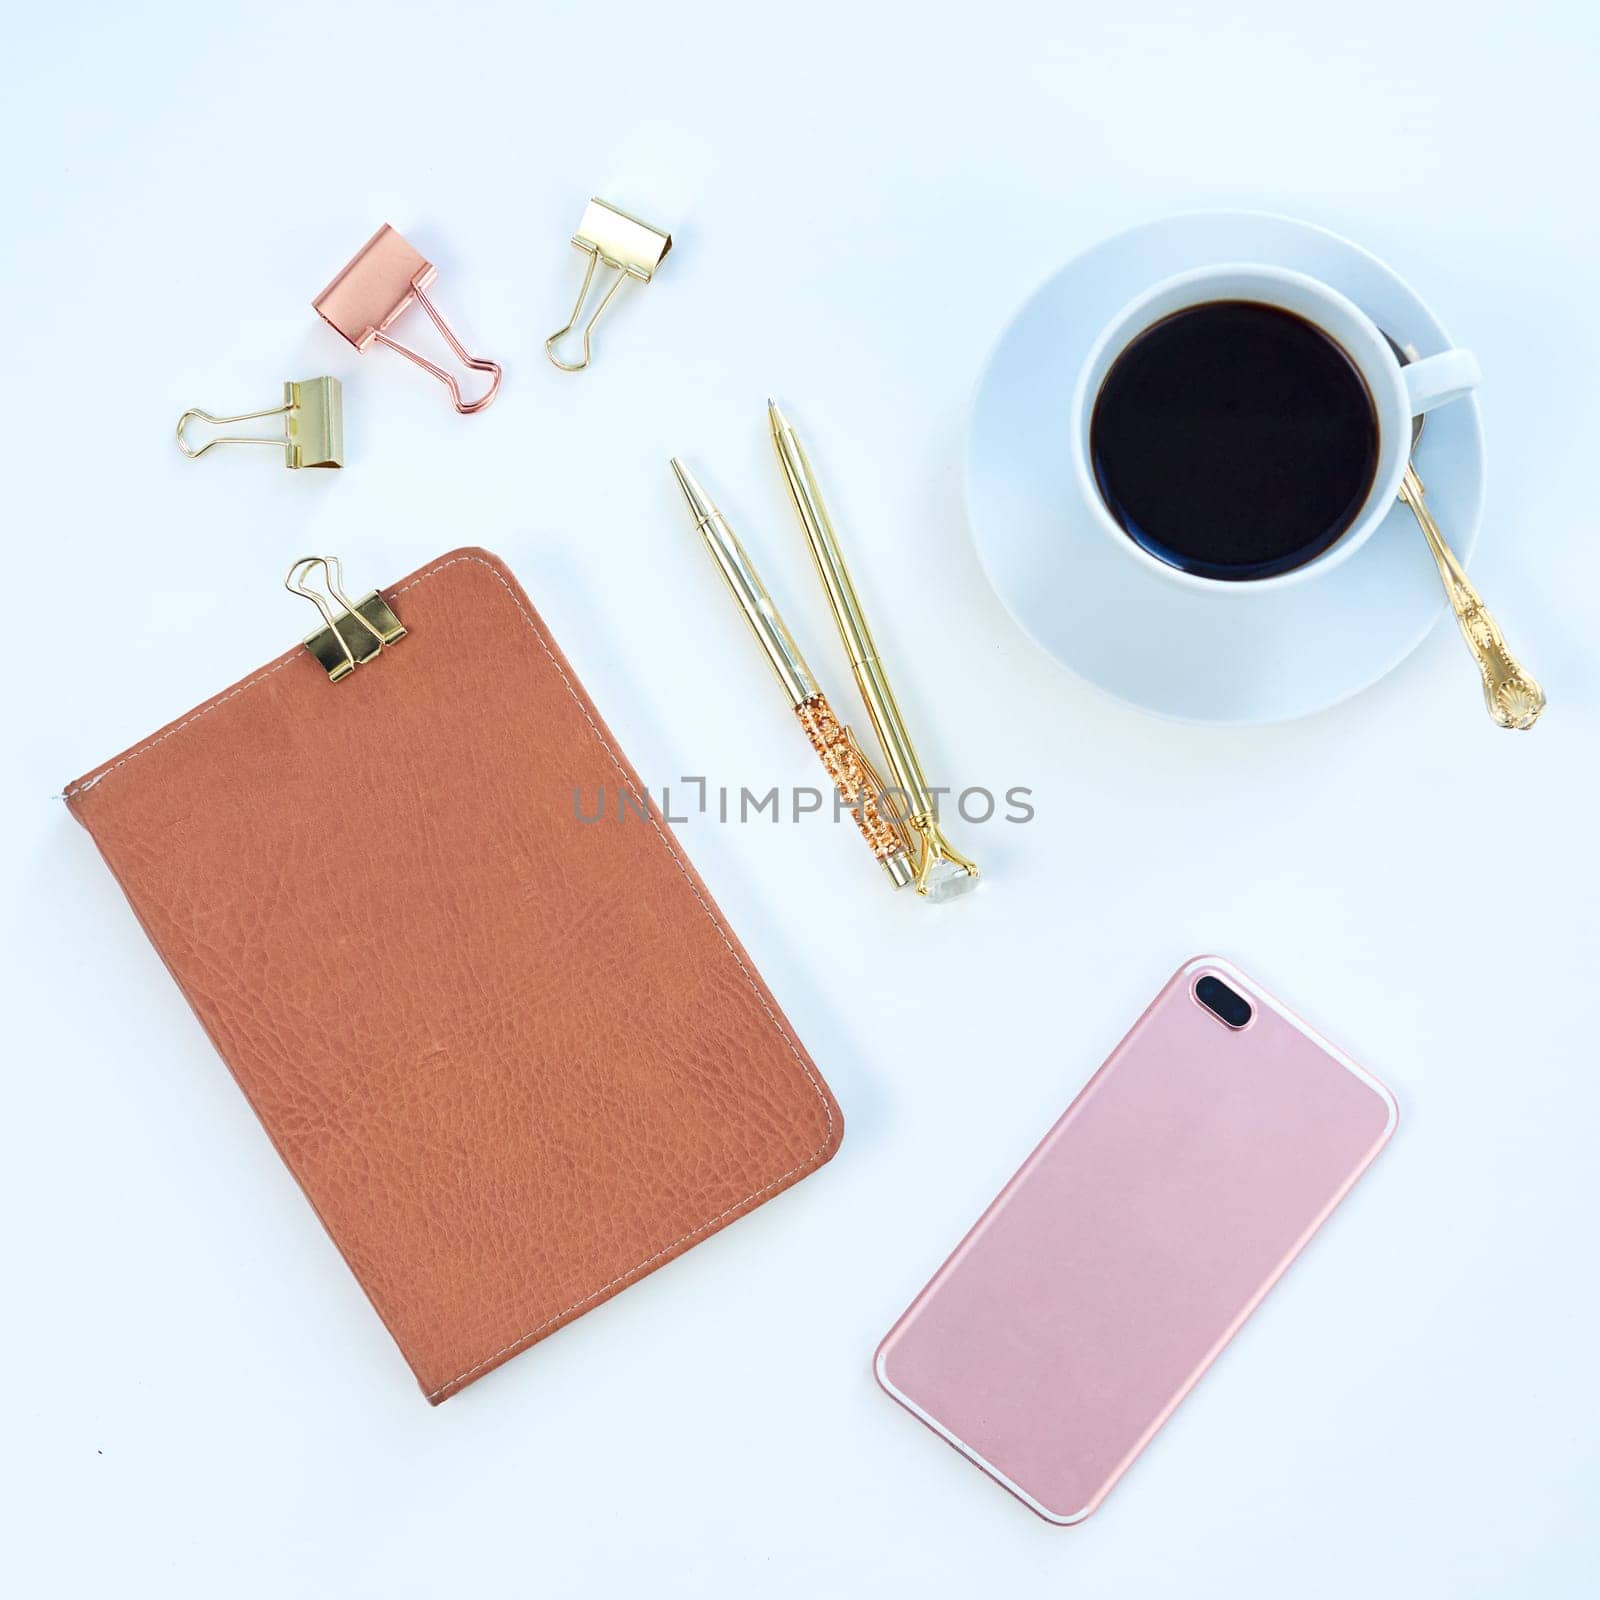 Above of notebook, phone and coffee in studio for working, writing notes and planning for career. Creative desk, business and diary, smartphone and stationery for social media on blue background.